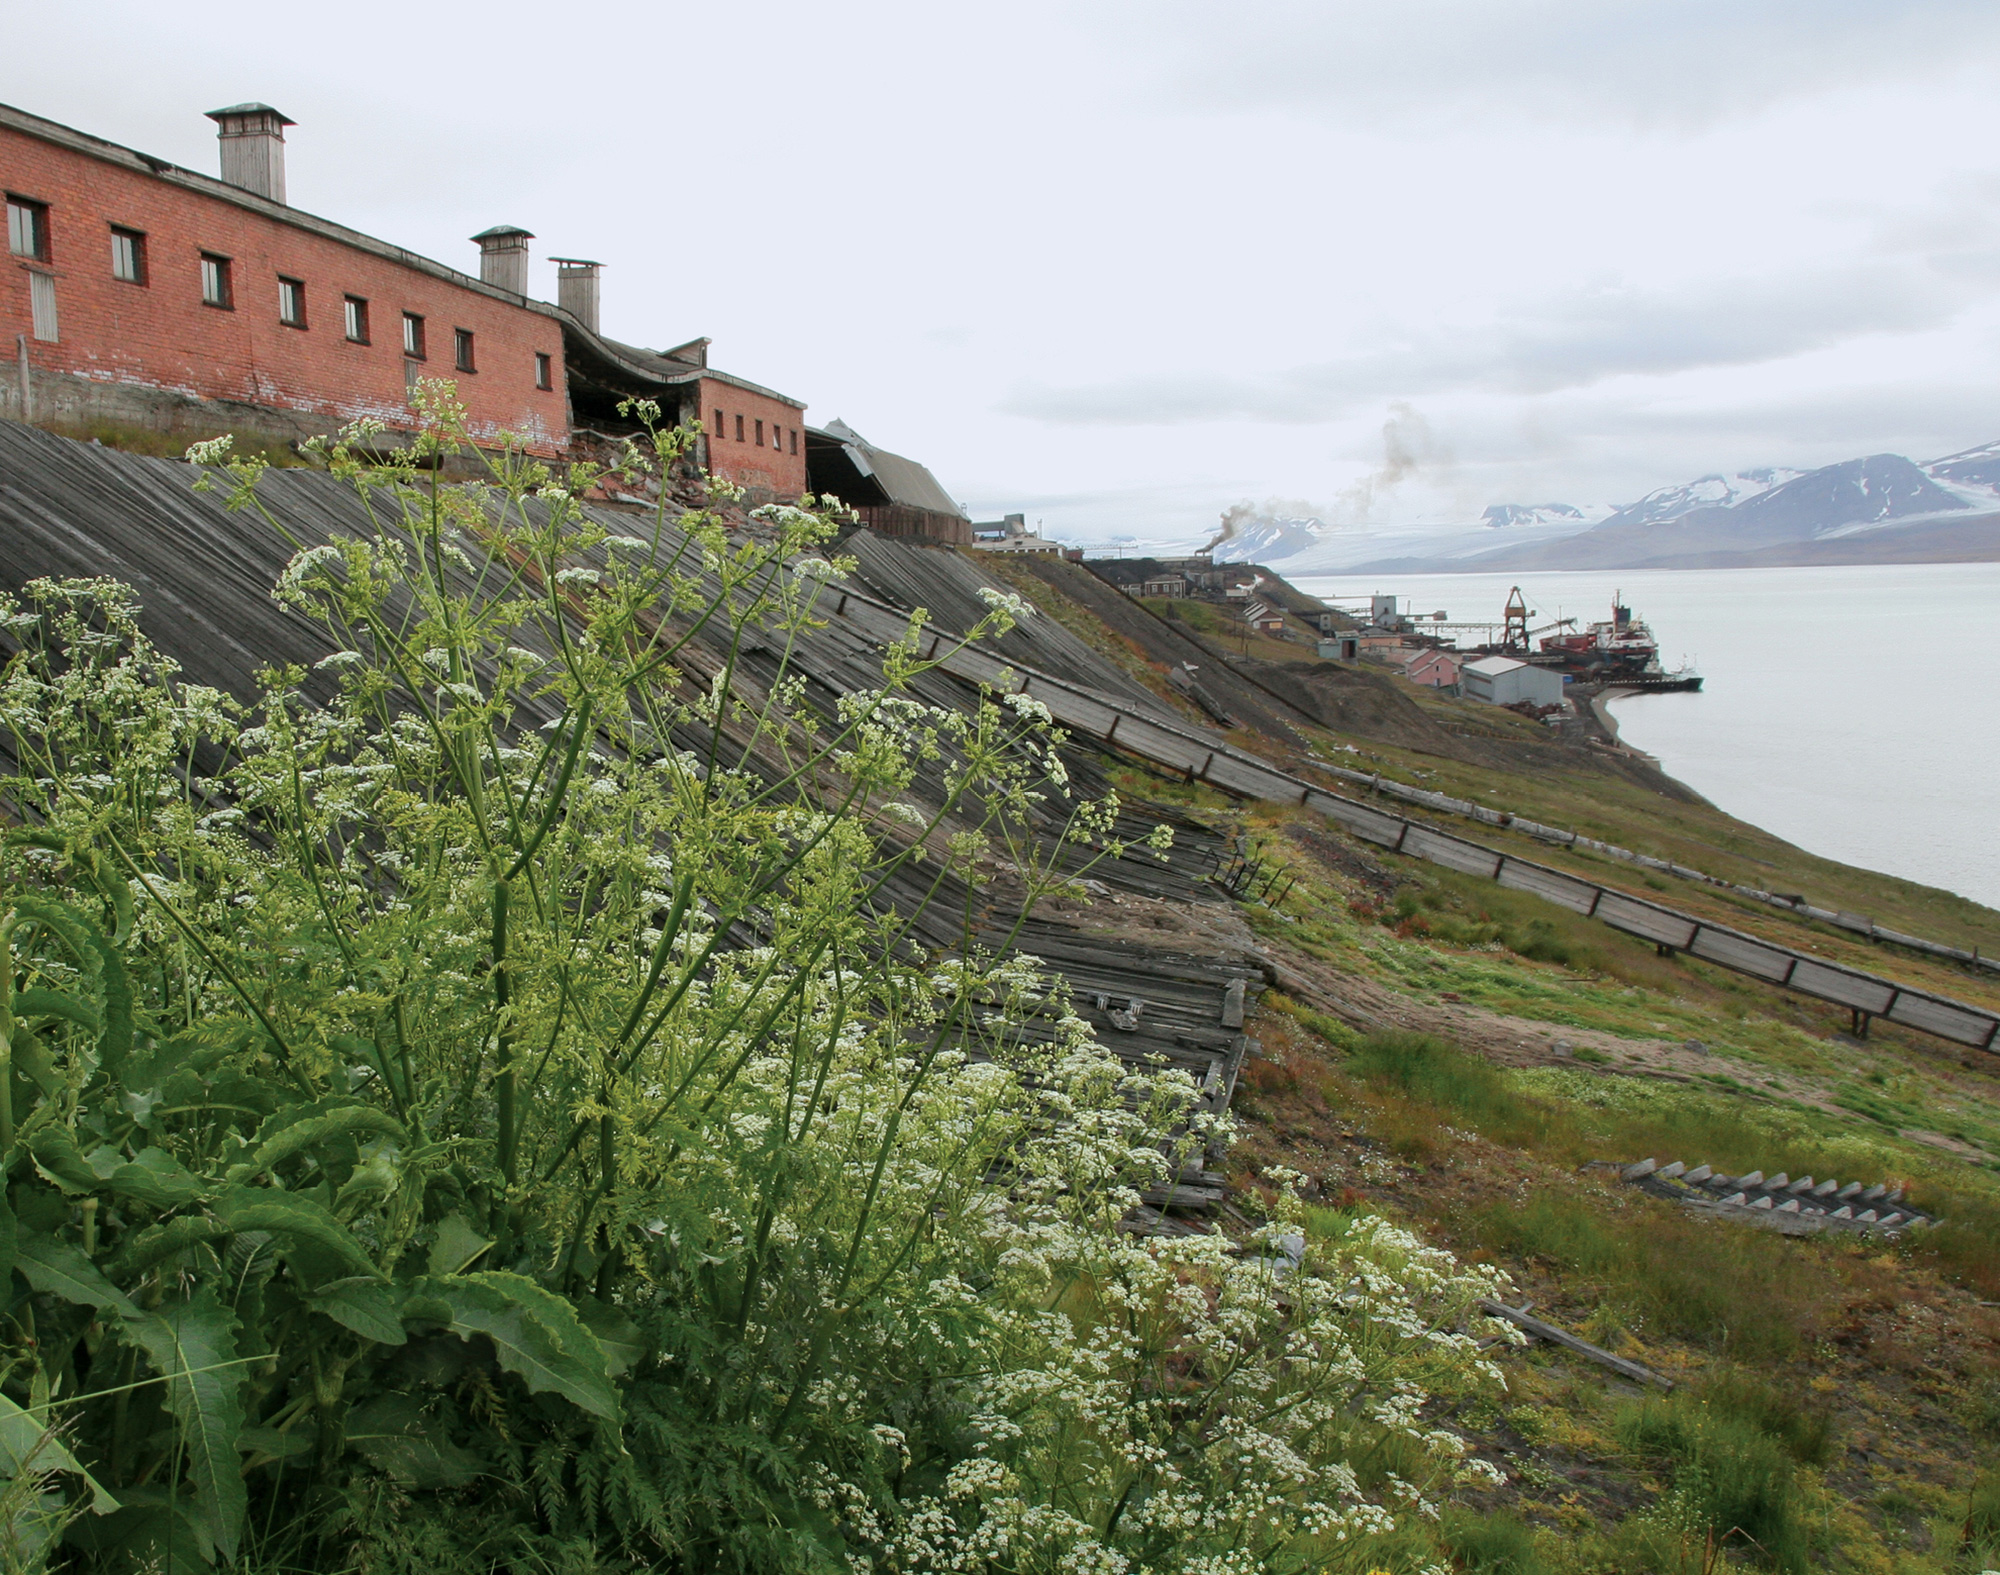 A photograph of Svalbard today, showing a selection of the thirty-odd plants growing there.